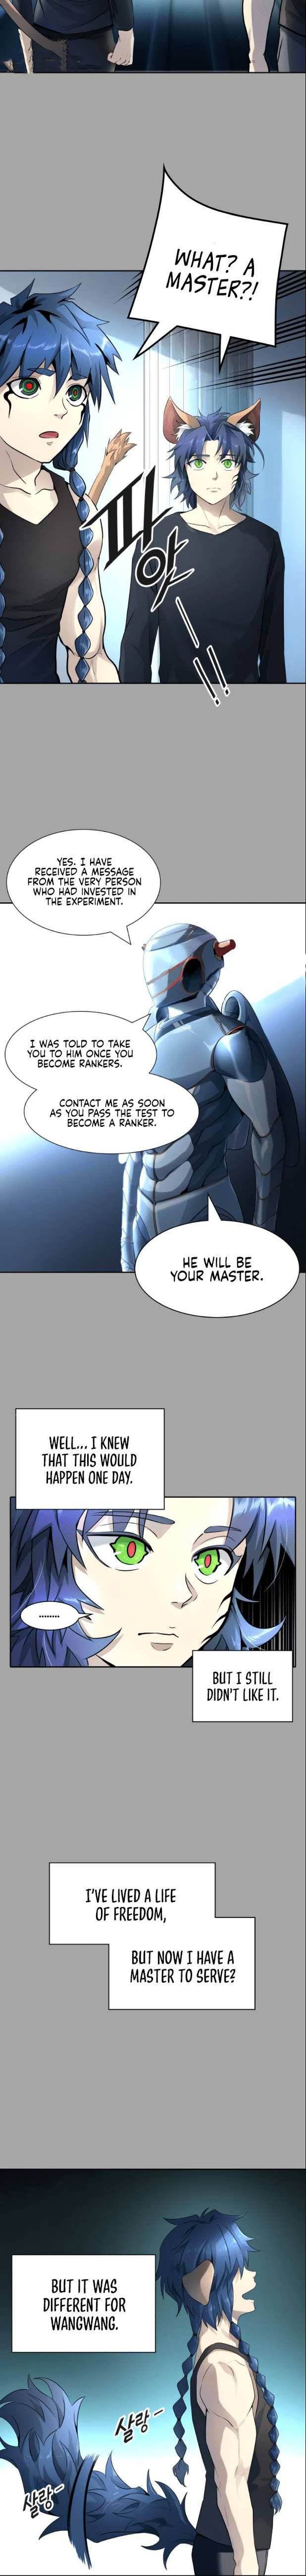 Tower Of God 526 10